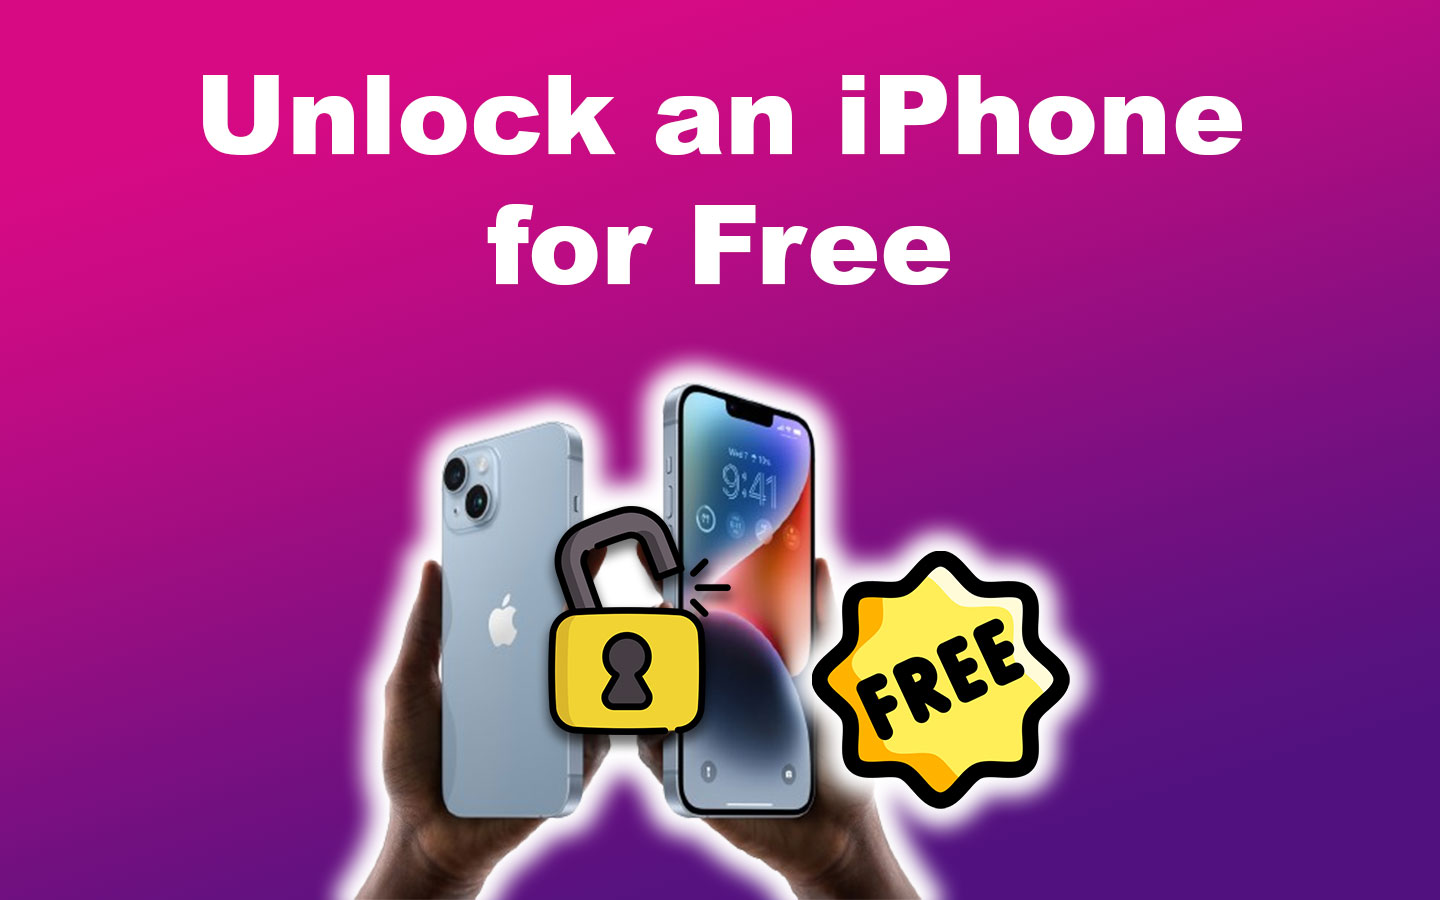 You Can Unlock an iPhone for Free